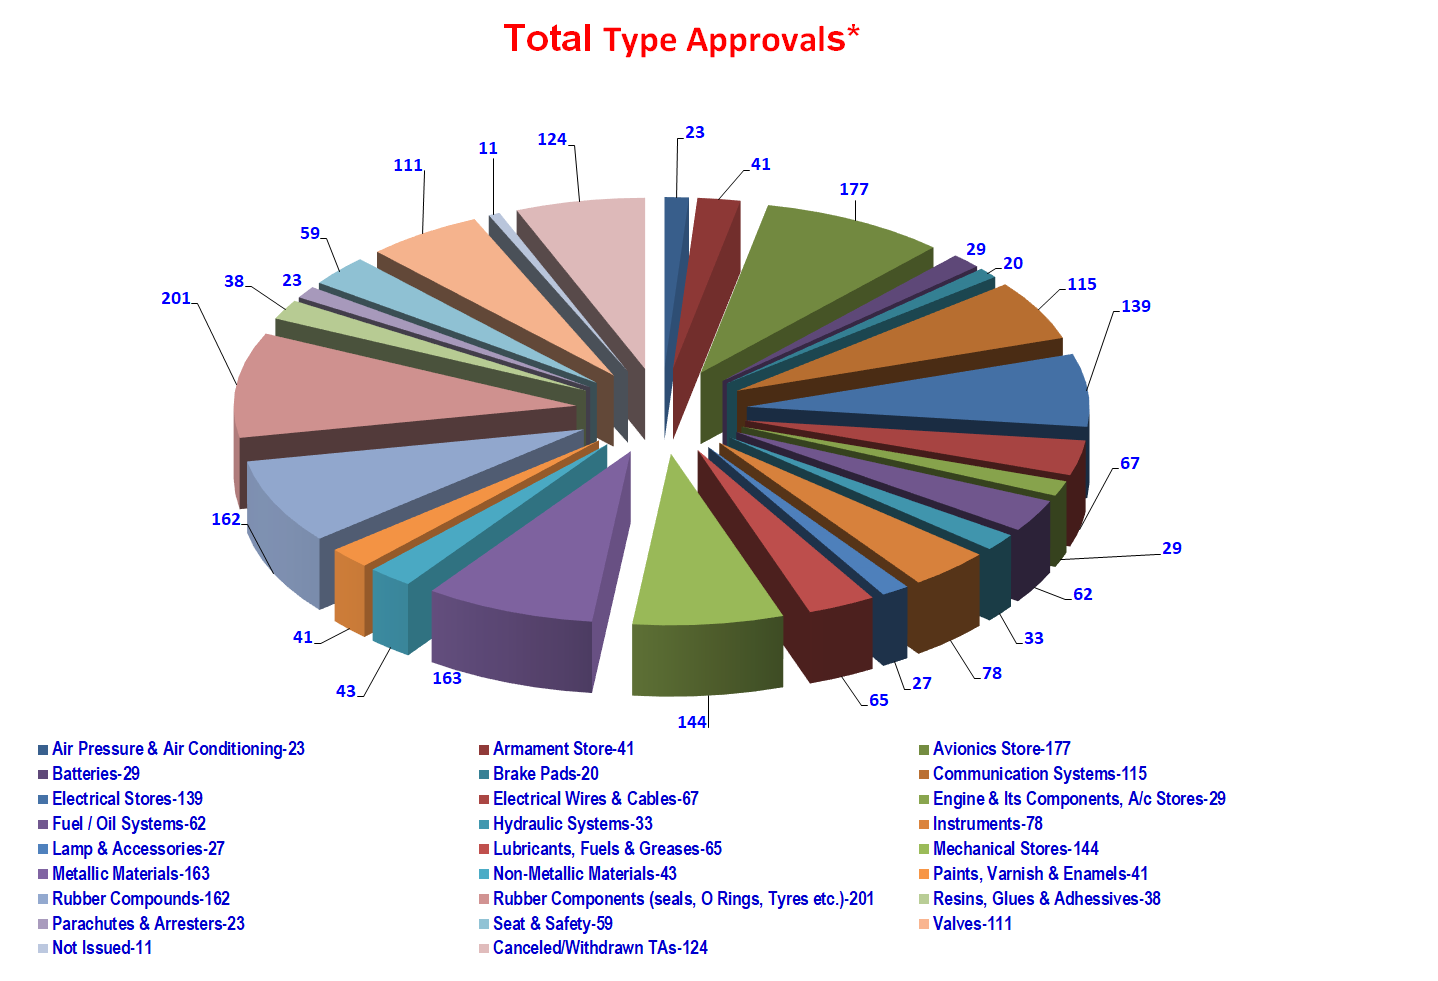 Type Approval Pie Chart